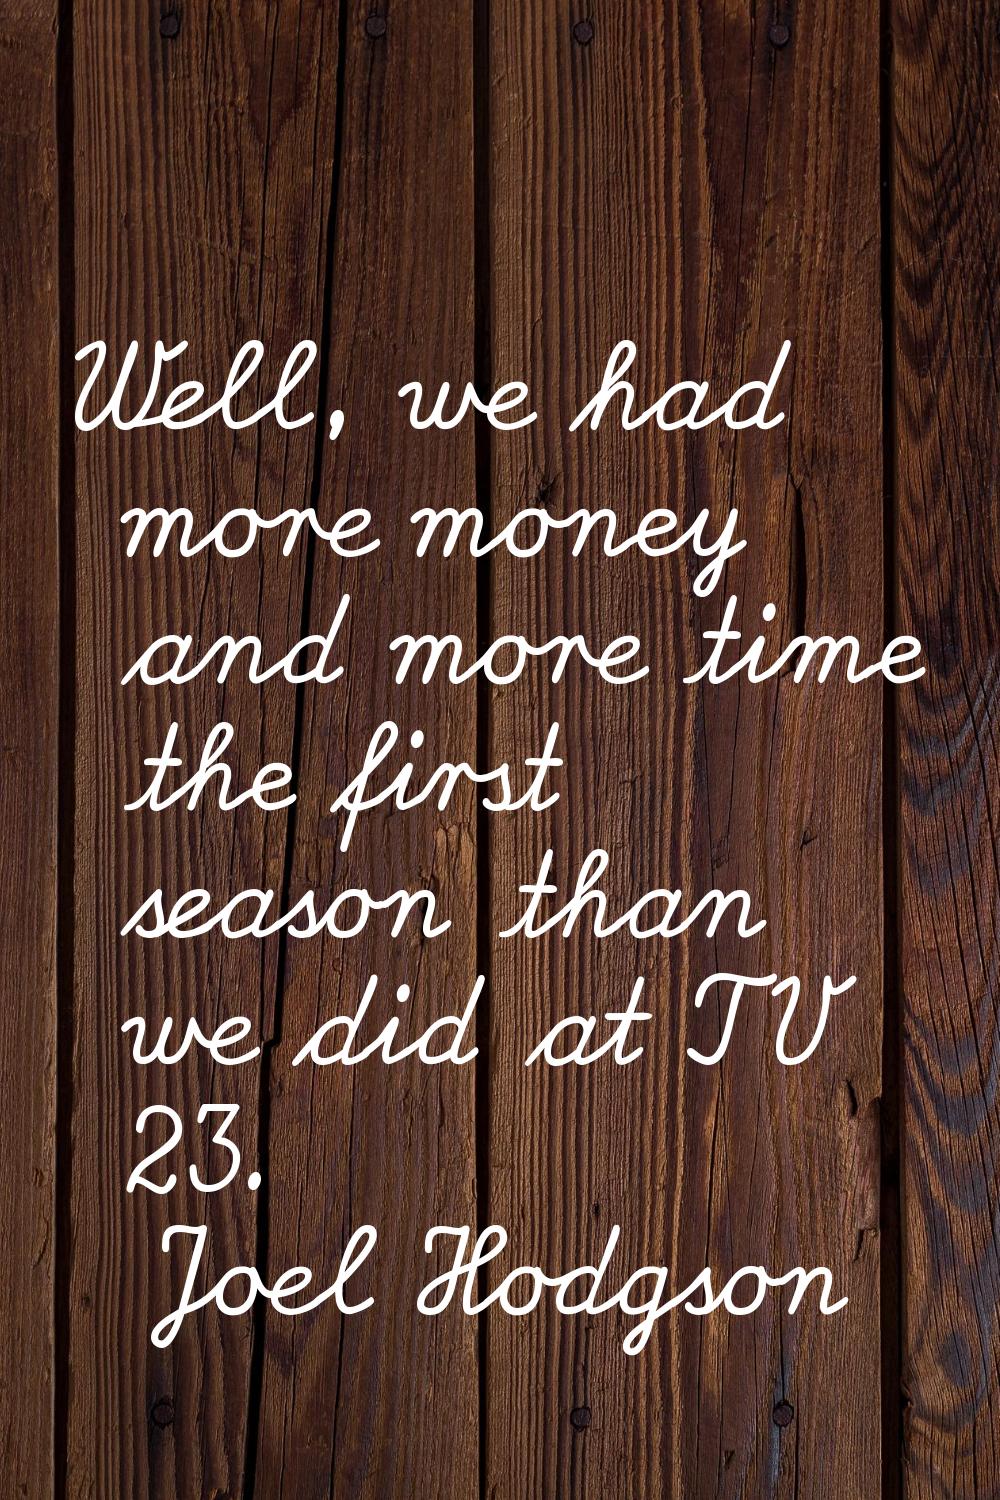 Well, we had more money and more time the first season than we did at TV 23.